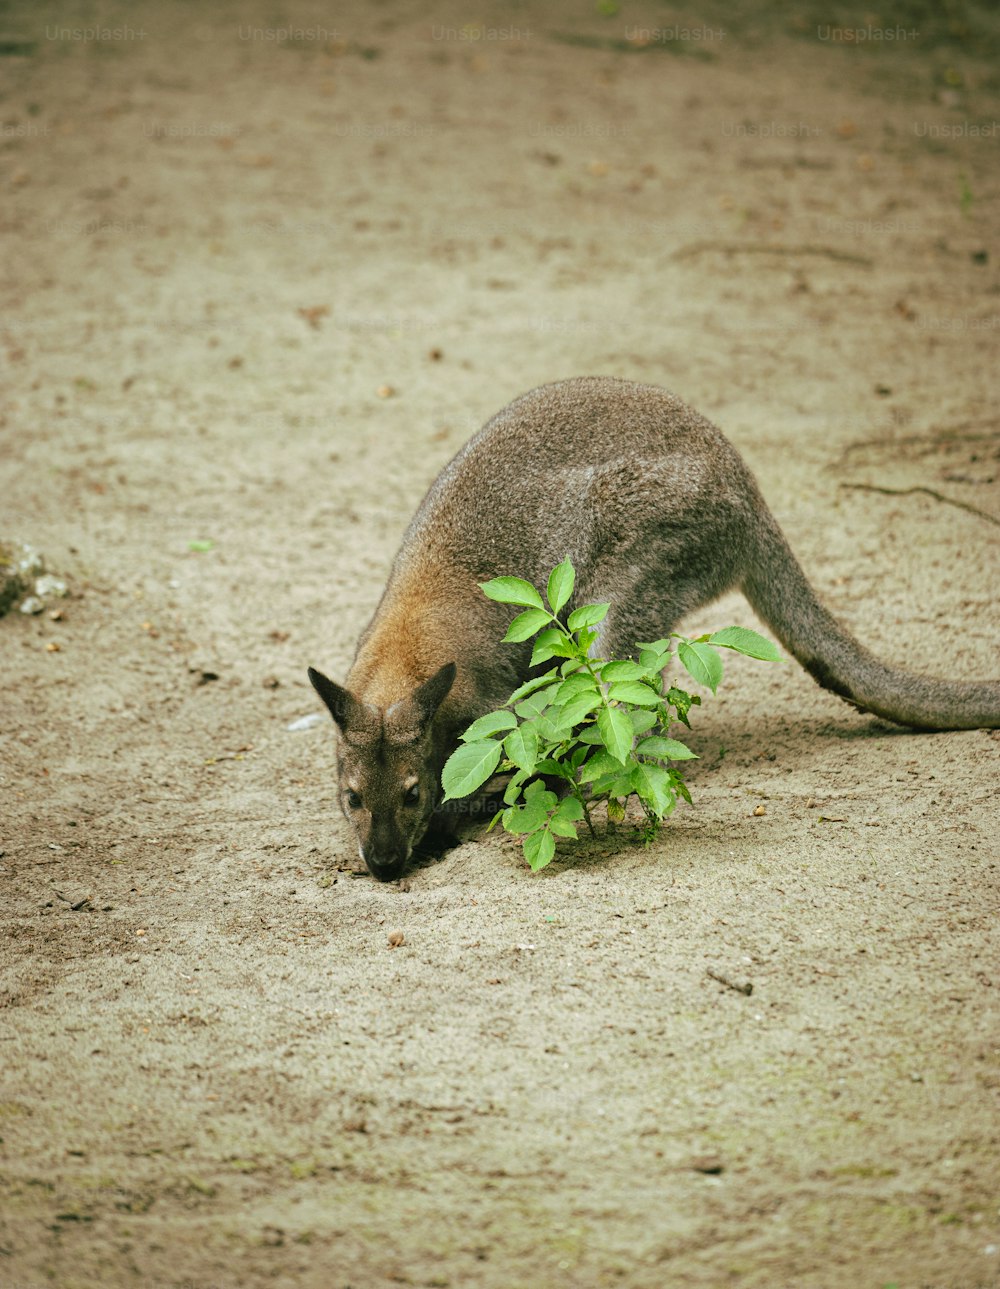 a kangaroo eating a plant in the dirt